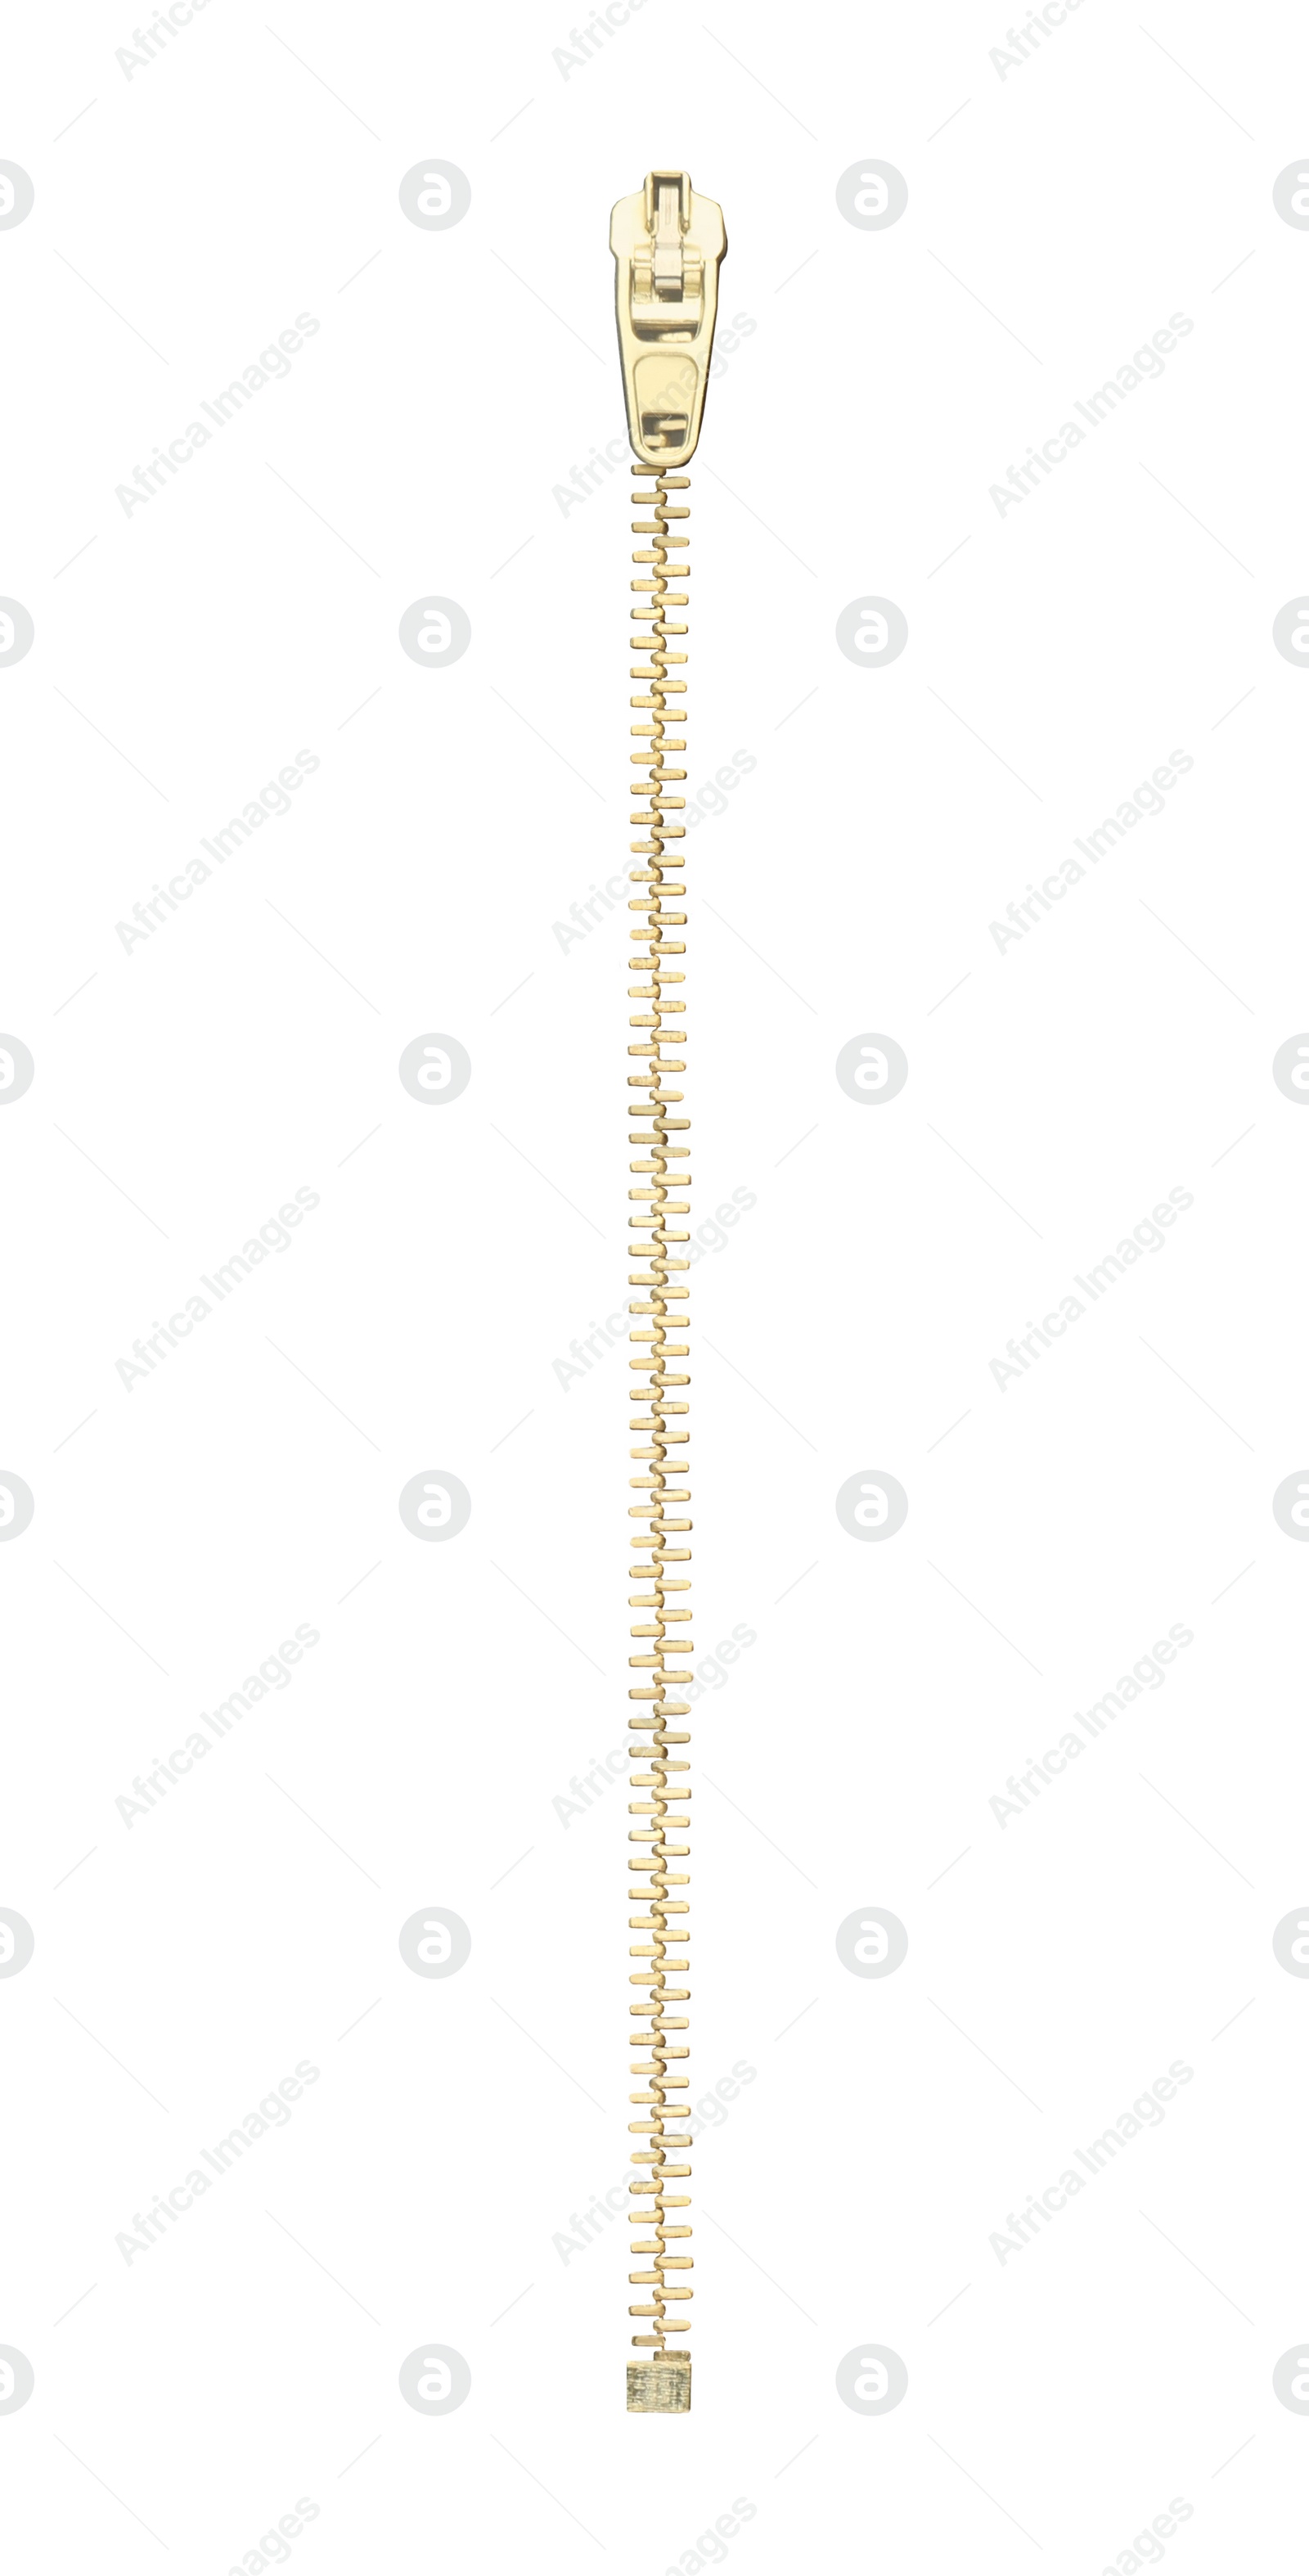 Image of Closed golden metal zipper isolated on white 